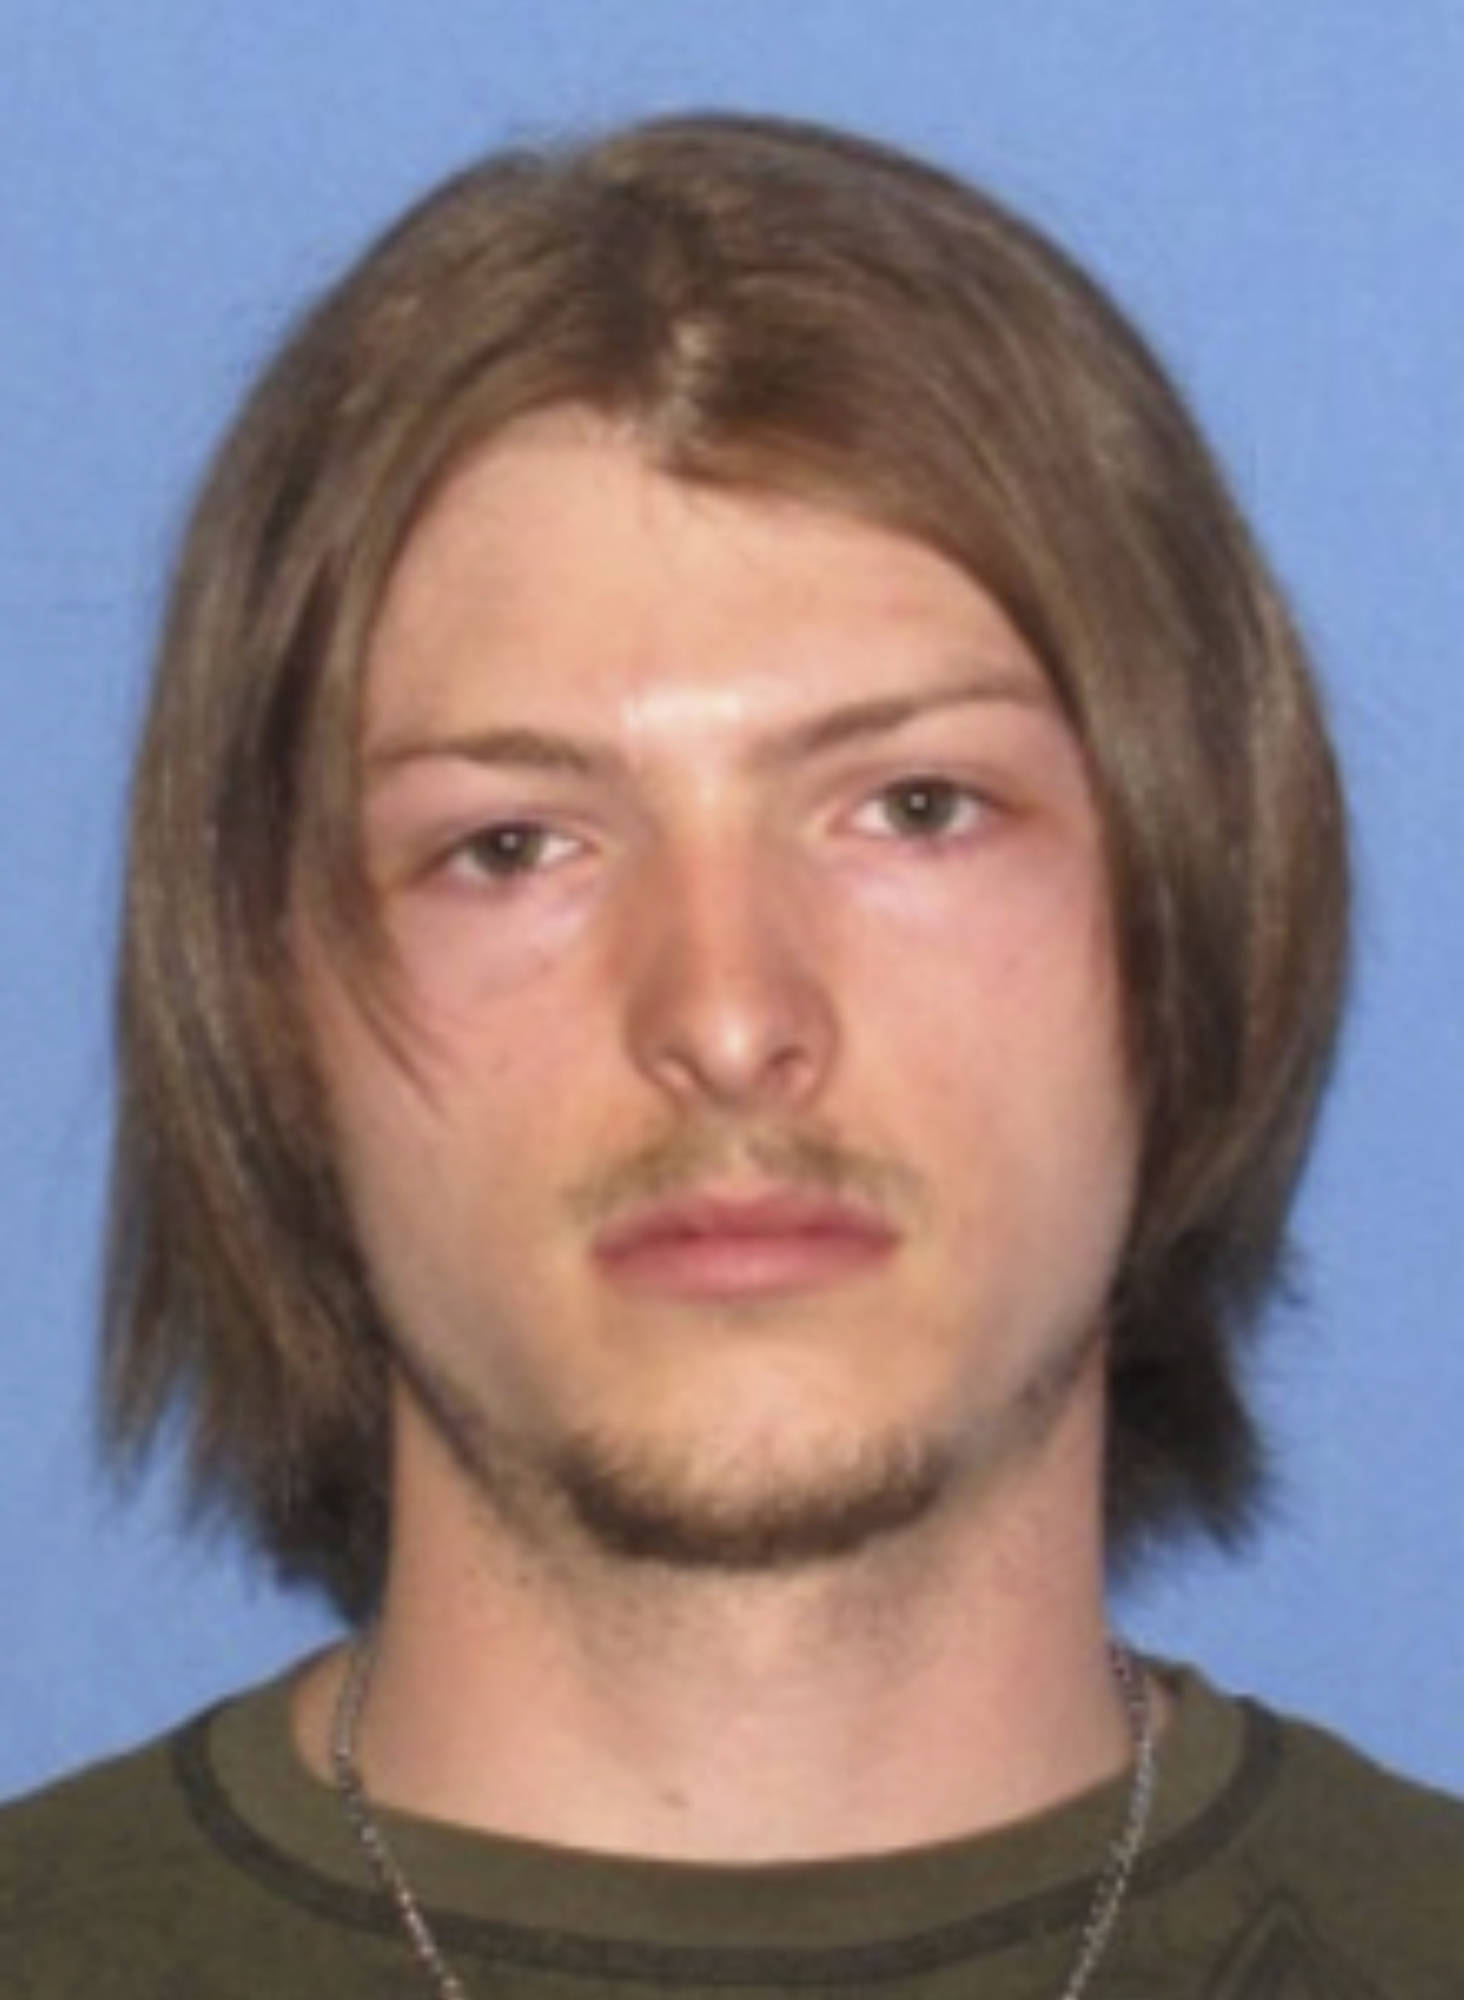 This undated images released by the Ohio Attorney General’s office, shows Edward “Jake” Wagner, one of four family members that has been arrested in the slayings of eight members of one family in rural Ohio two years ago, authorities announced Tuesday, Nov. 13, 2018. (Ohio Attorney General’s office via AP)